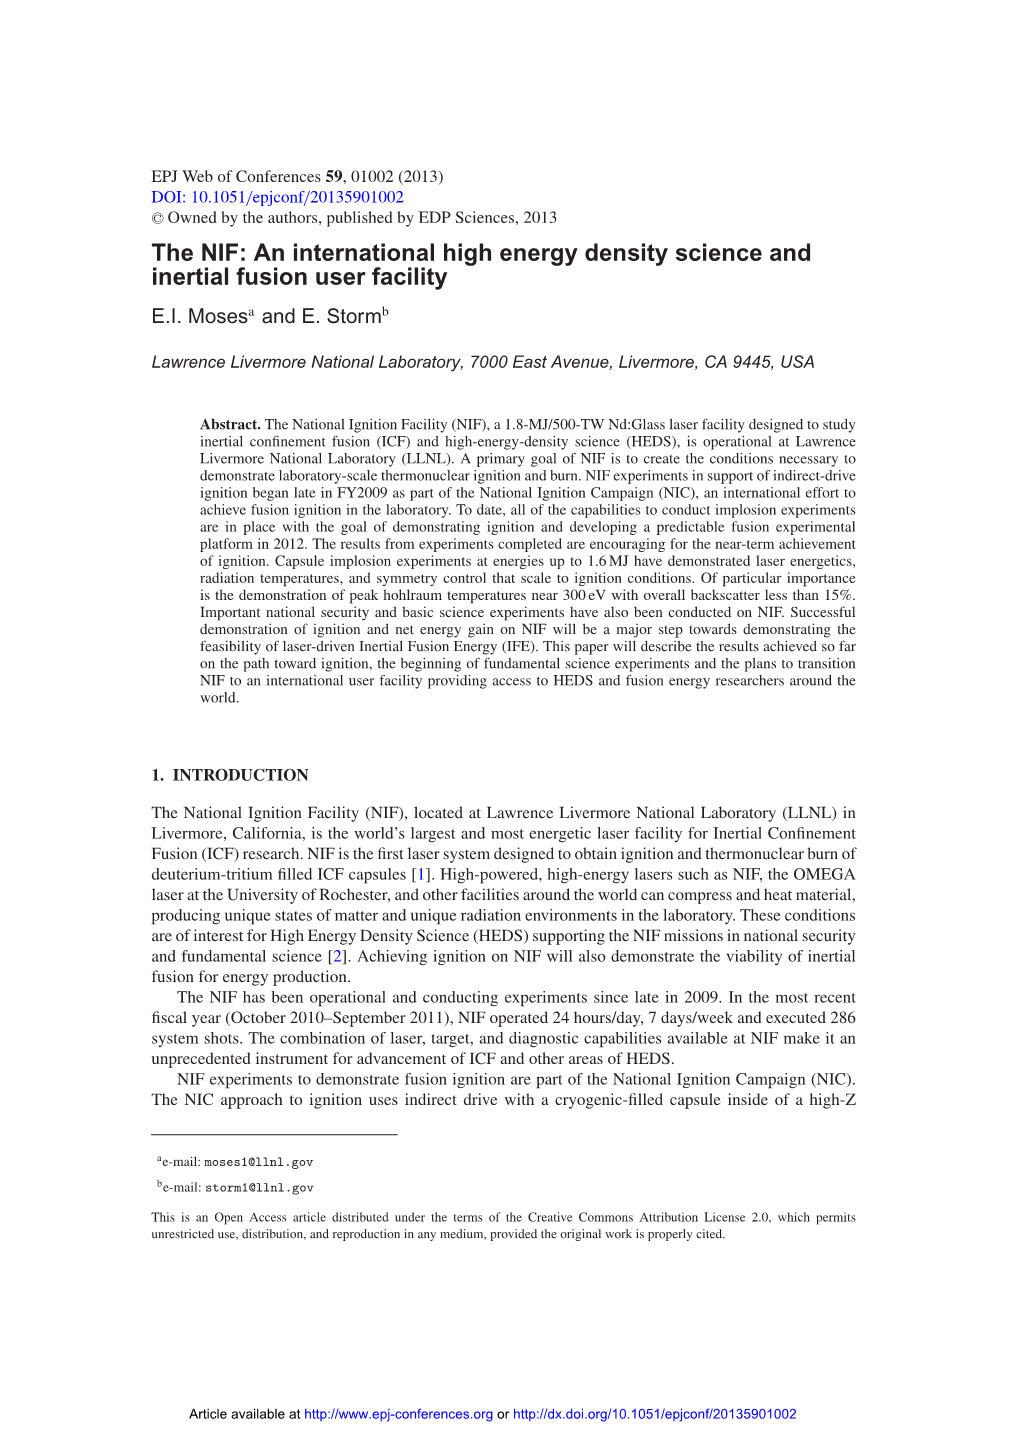 The NIF: an International High Energy Density Science and Inertial Fusion User Facility E.I